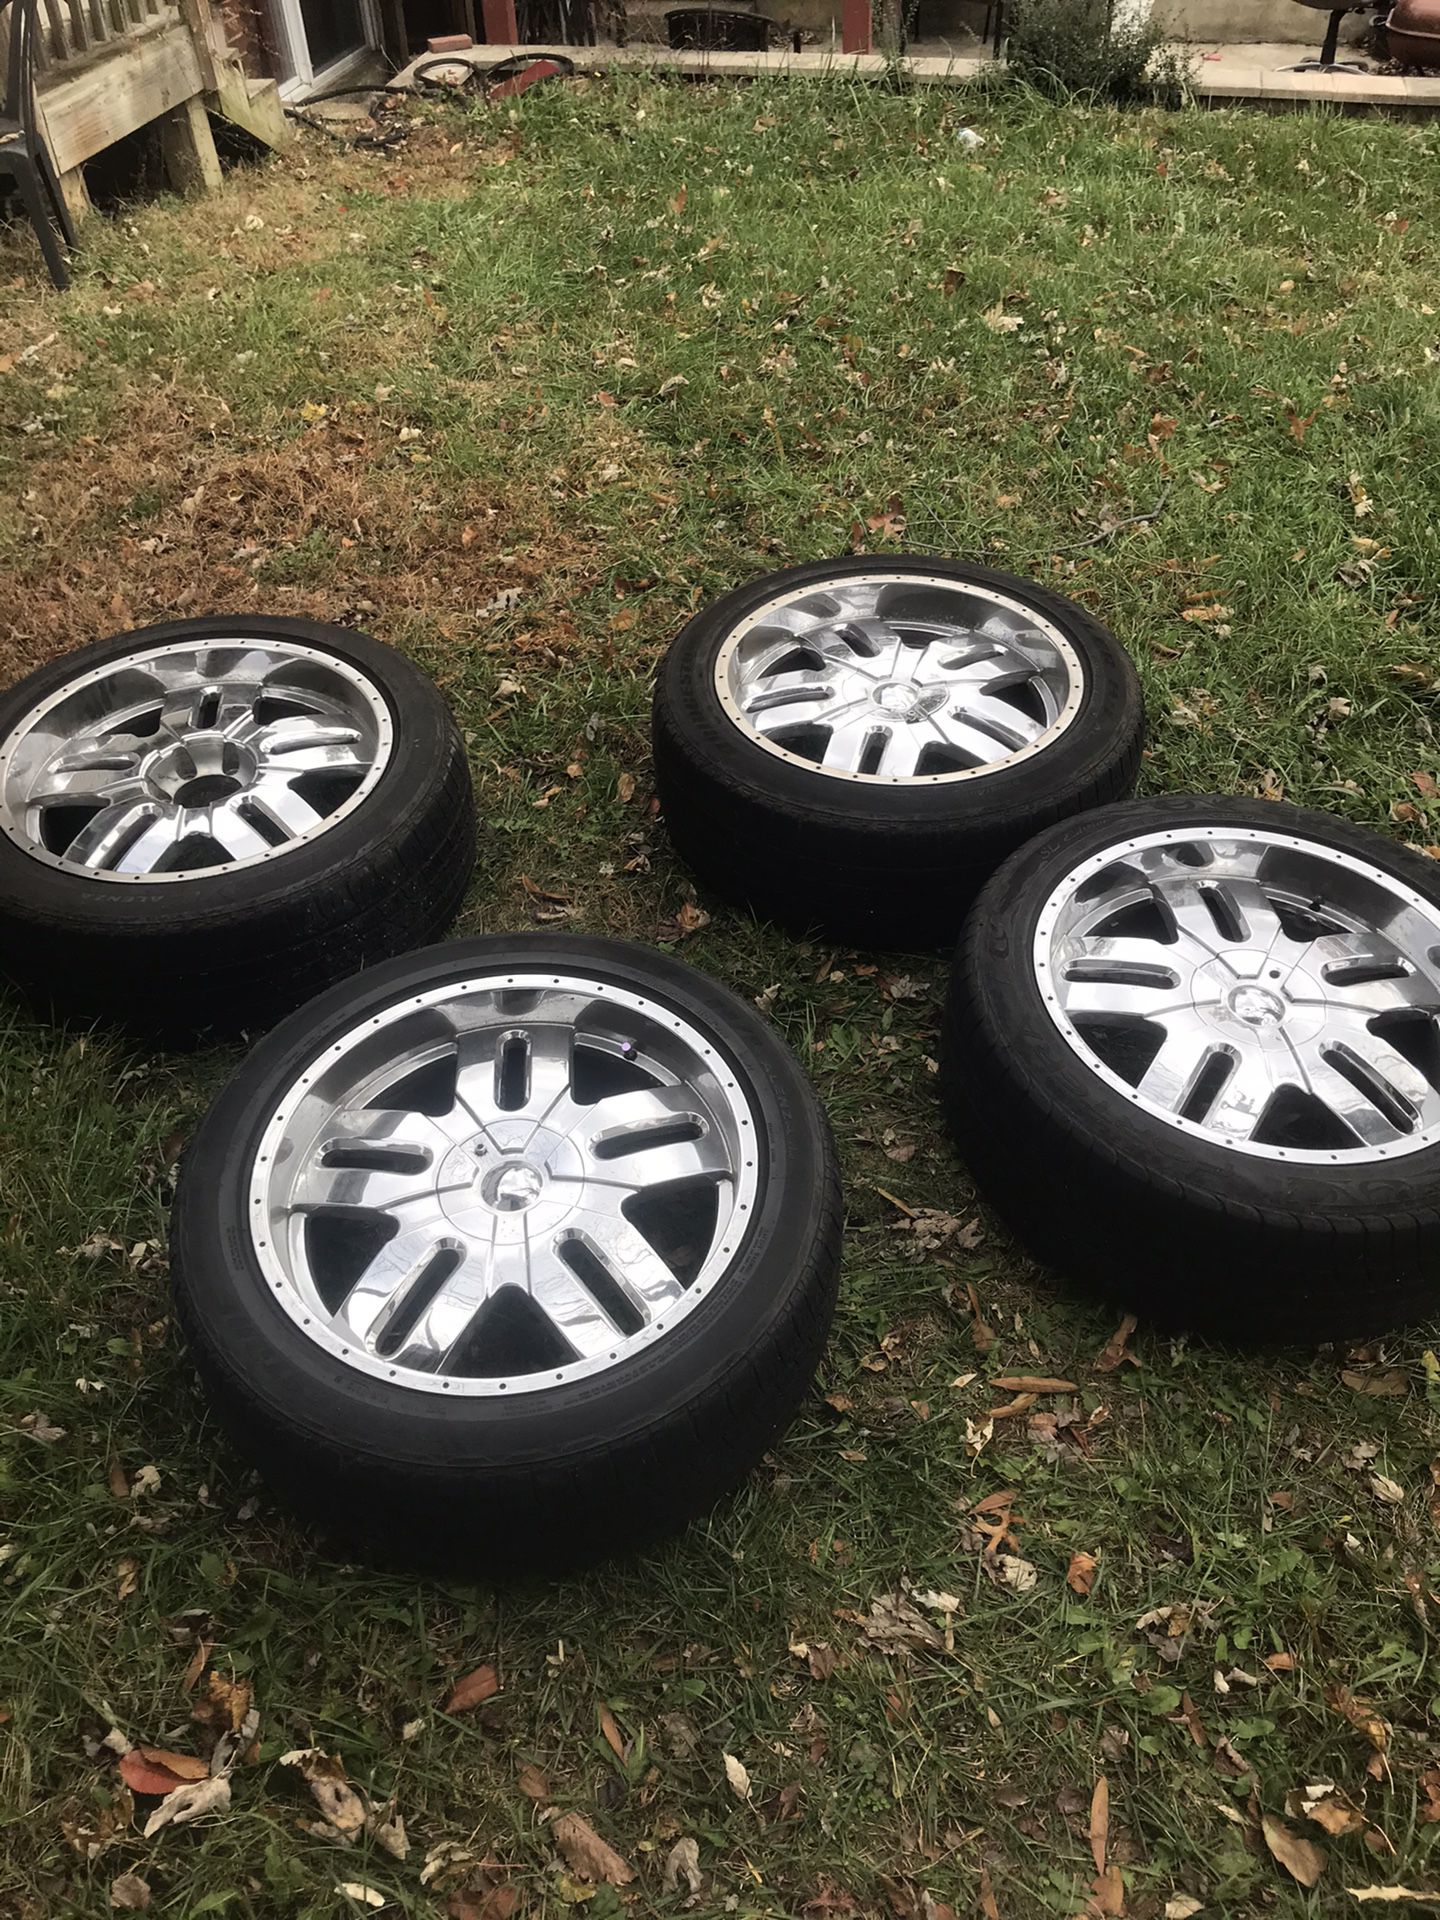 22” Rims/Wheels with tires